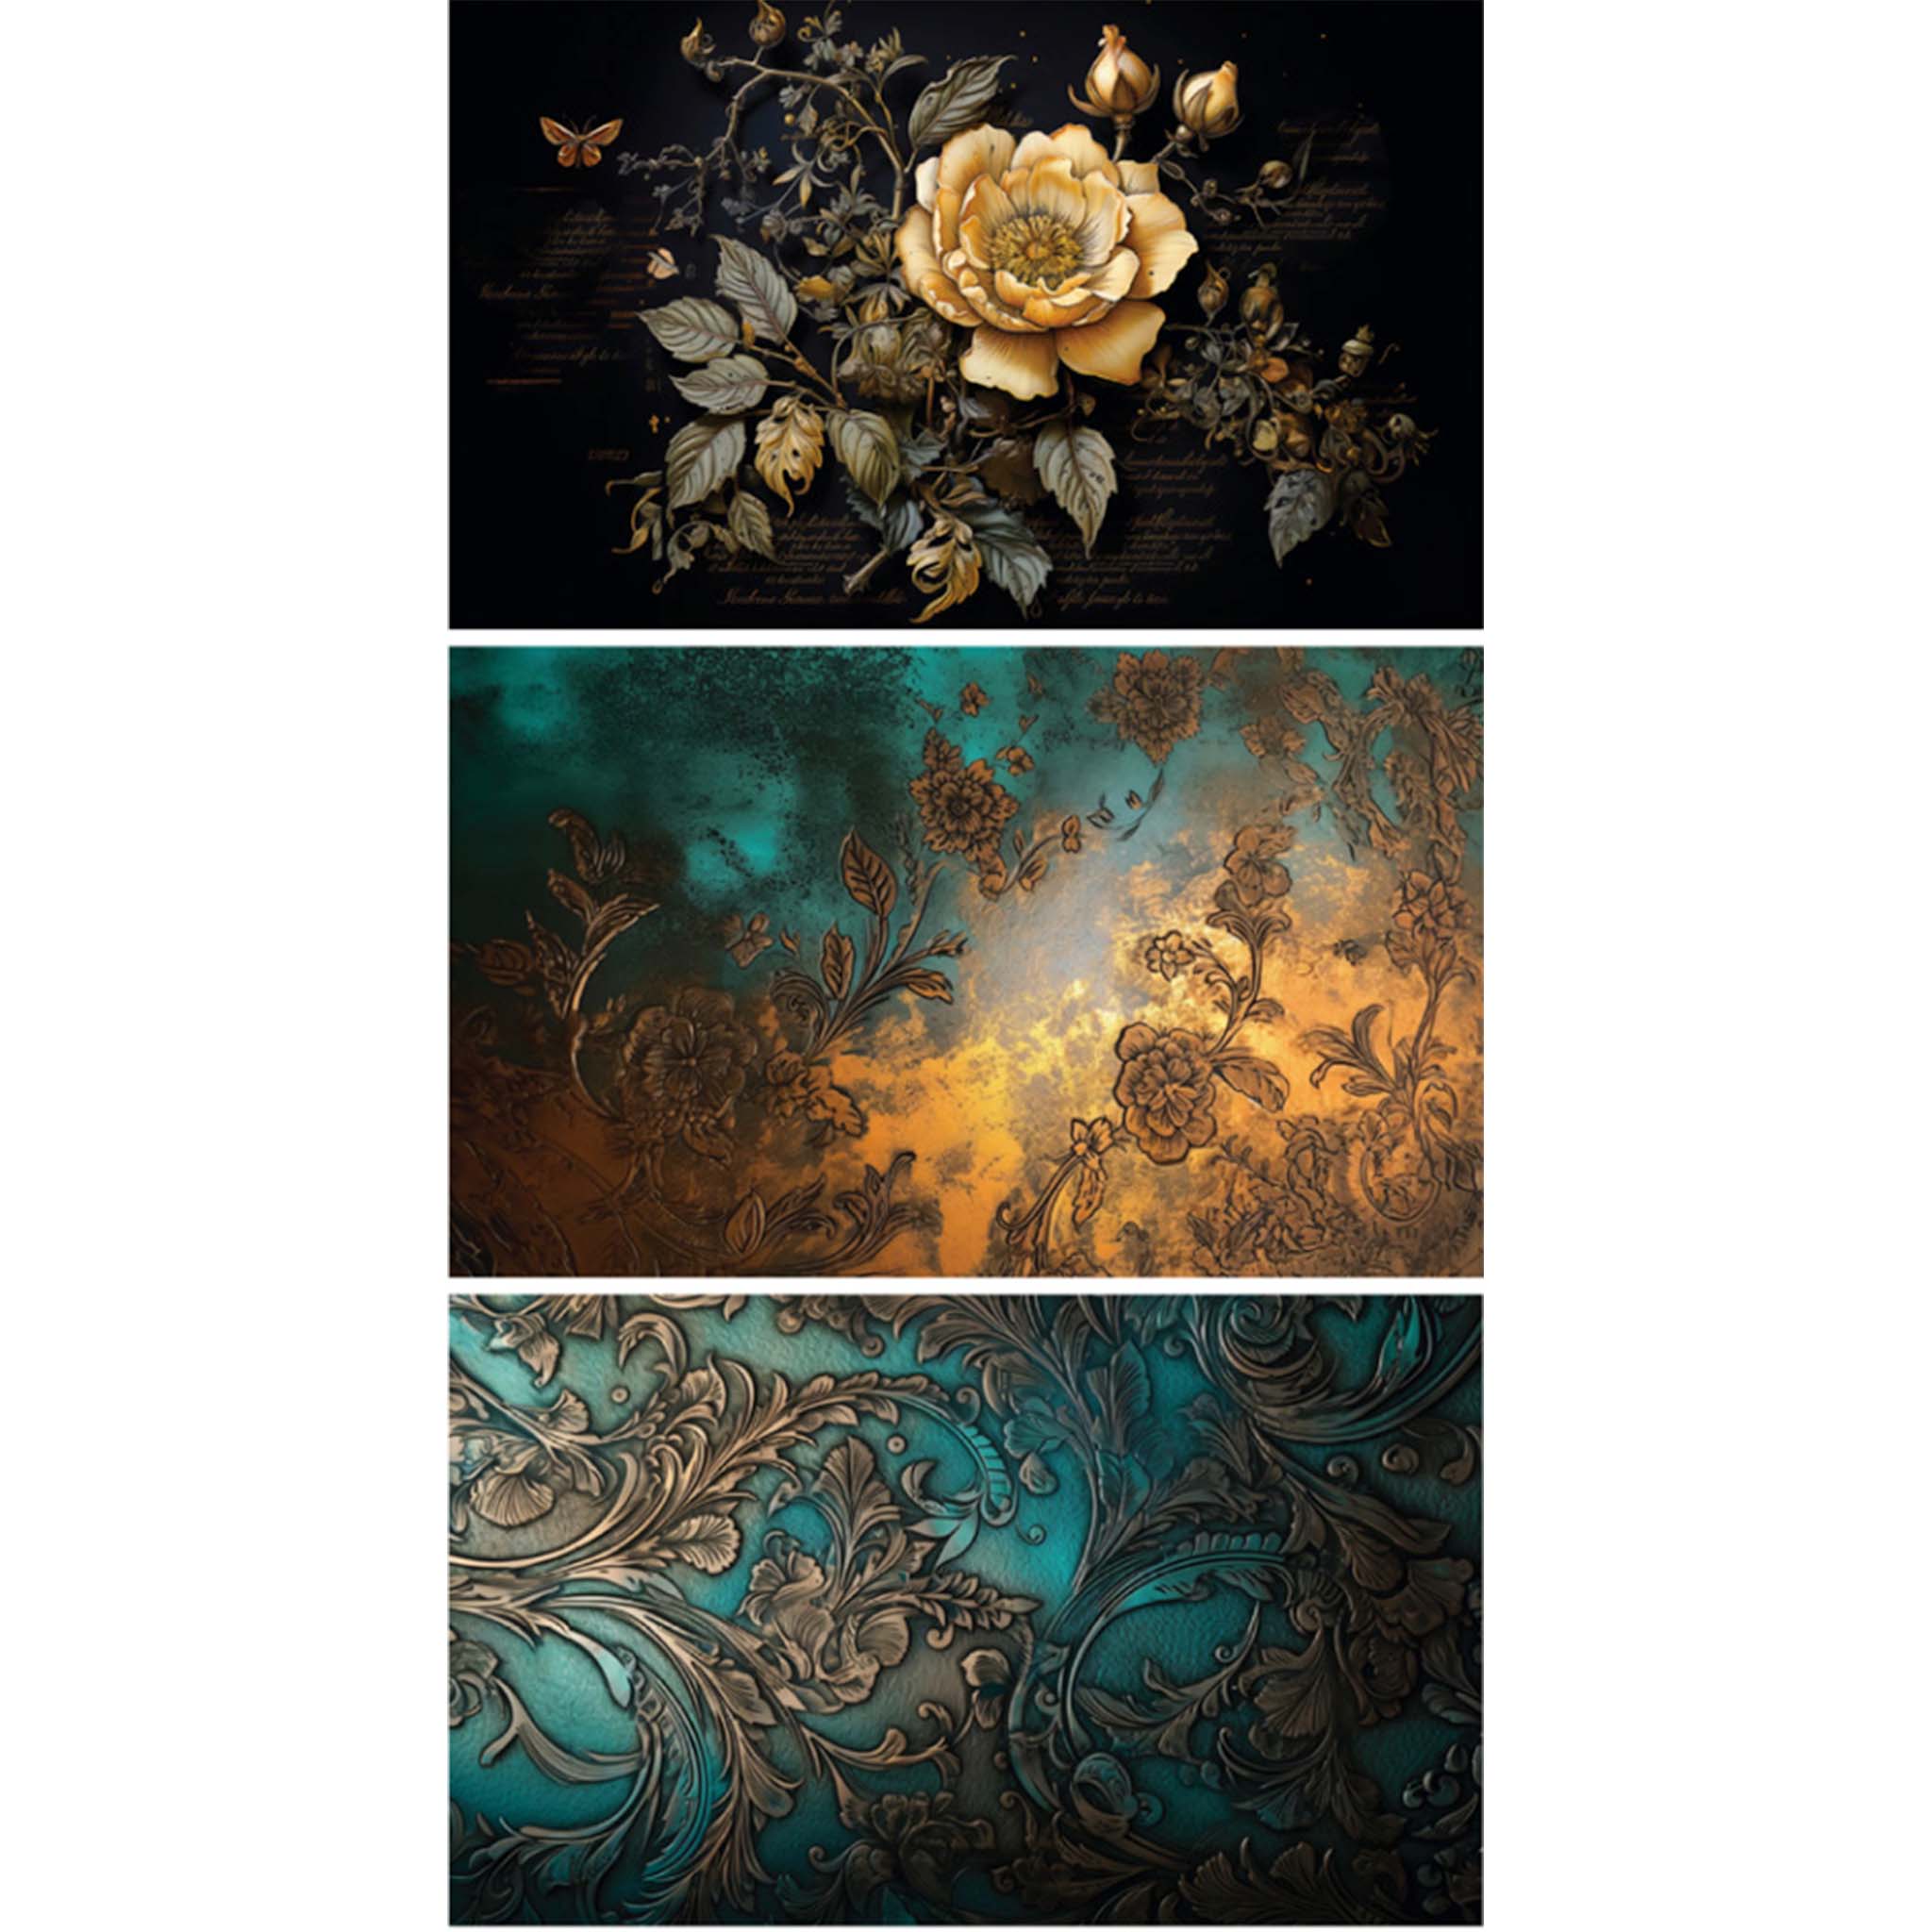 Three floral tissue papers. They feature a large cream colored flower with foliage against a black ground with script; a patina background with bronze-colored vining flowers; and an embossed-style scrolling floral pattern against a teal background. White borders are on the sides.